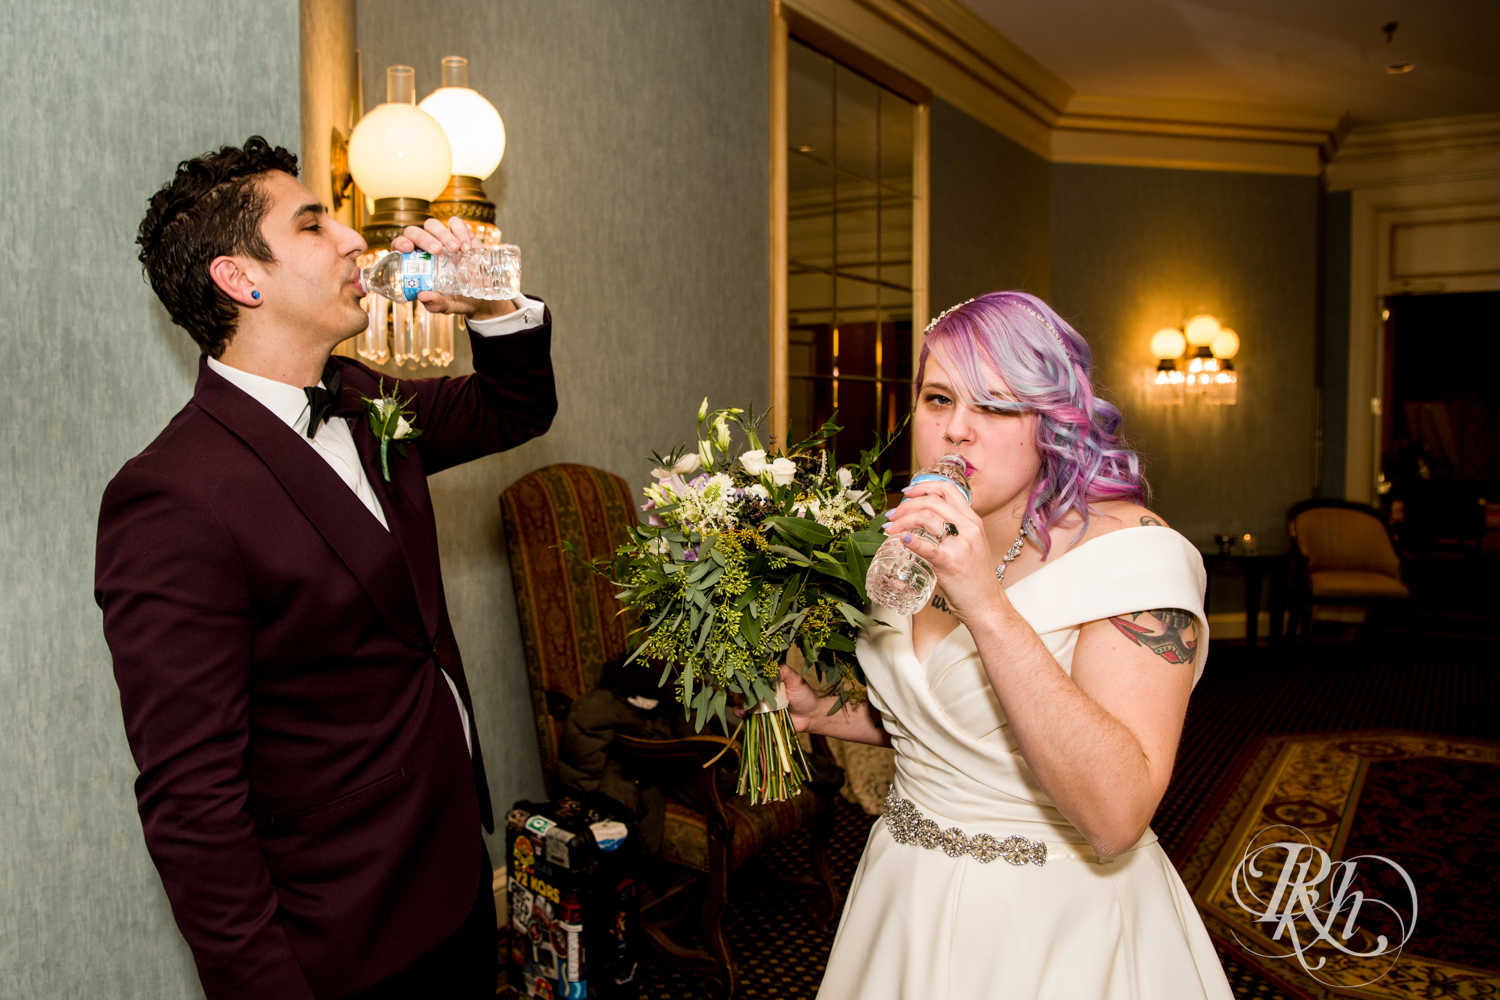 Bride and groom drinking water after wedding ceremony at the Saint Paul Hotel in Saint Paul, Minnesota.